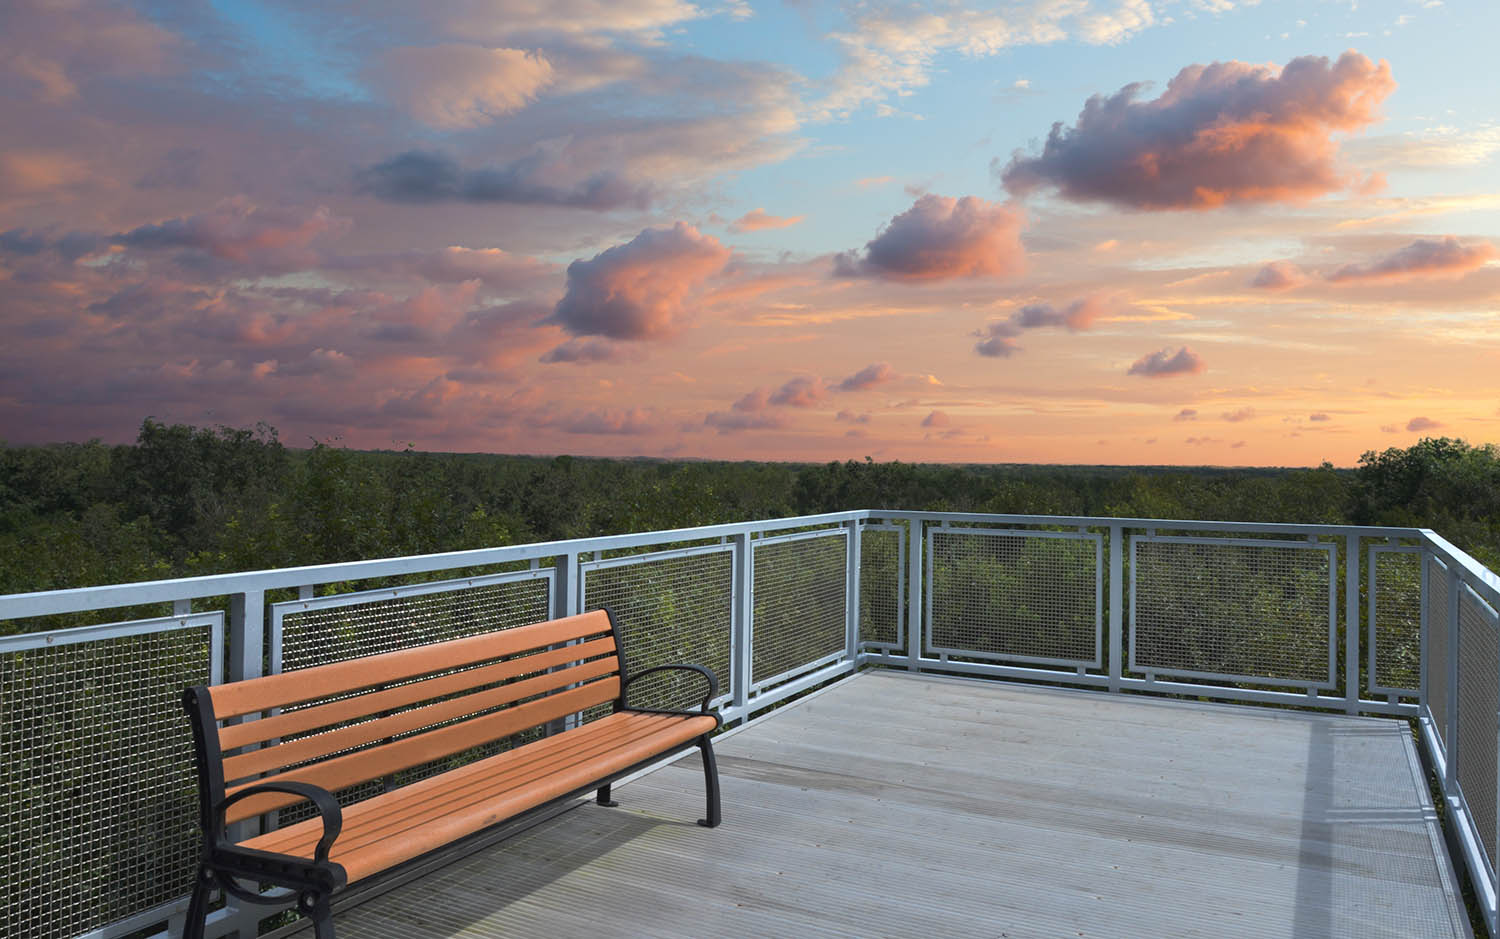 A sunset photo at Green Mountain Scenic Overlook